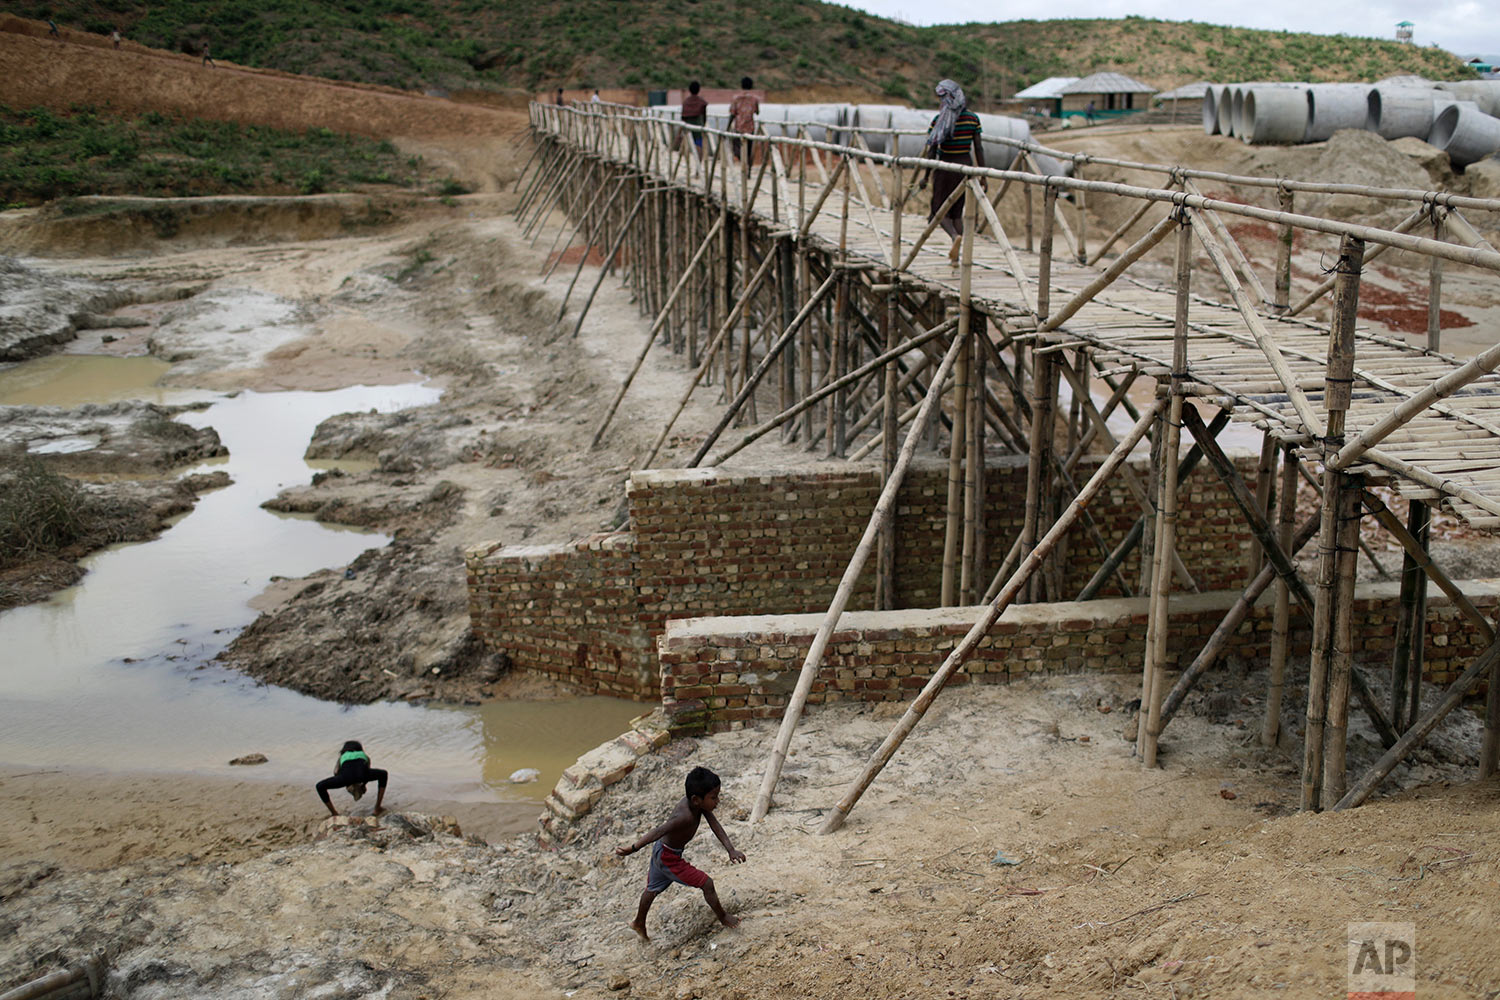  In this Thursday, June 28, 2018, photo, Rohingya refugees cross a newly built bridge in the extended area of Kutupalong refugee camp in Bangladesh where some refugees living in areas considered at risk of landslides and flooding were relocated to. (